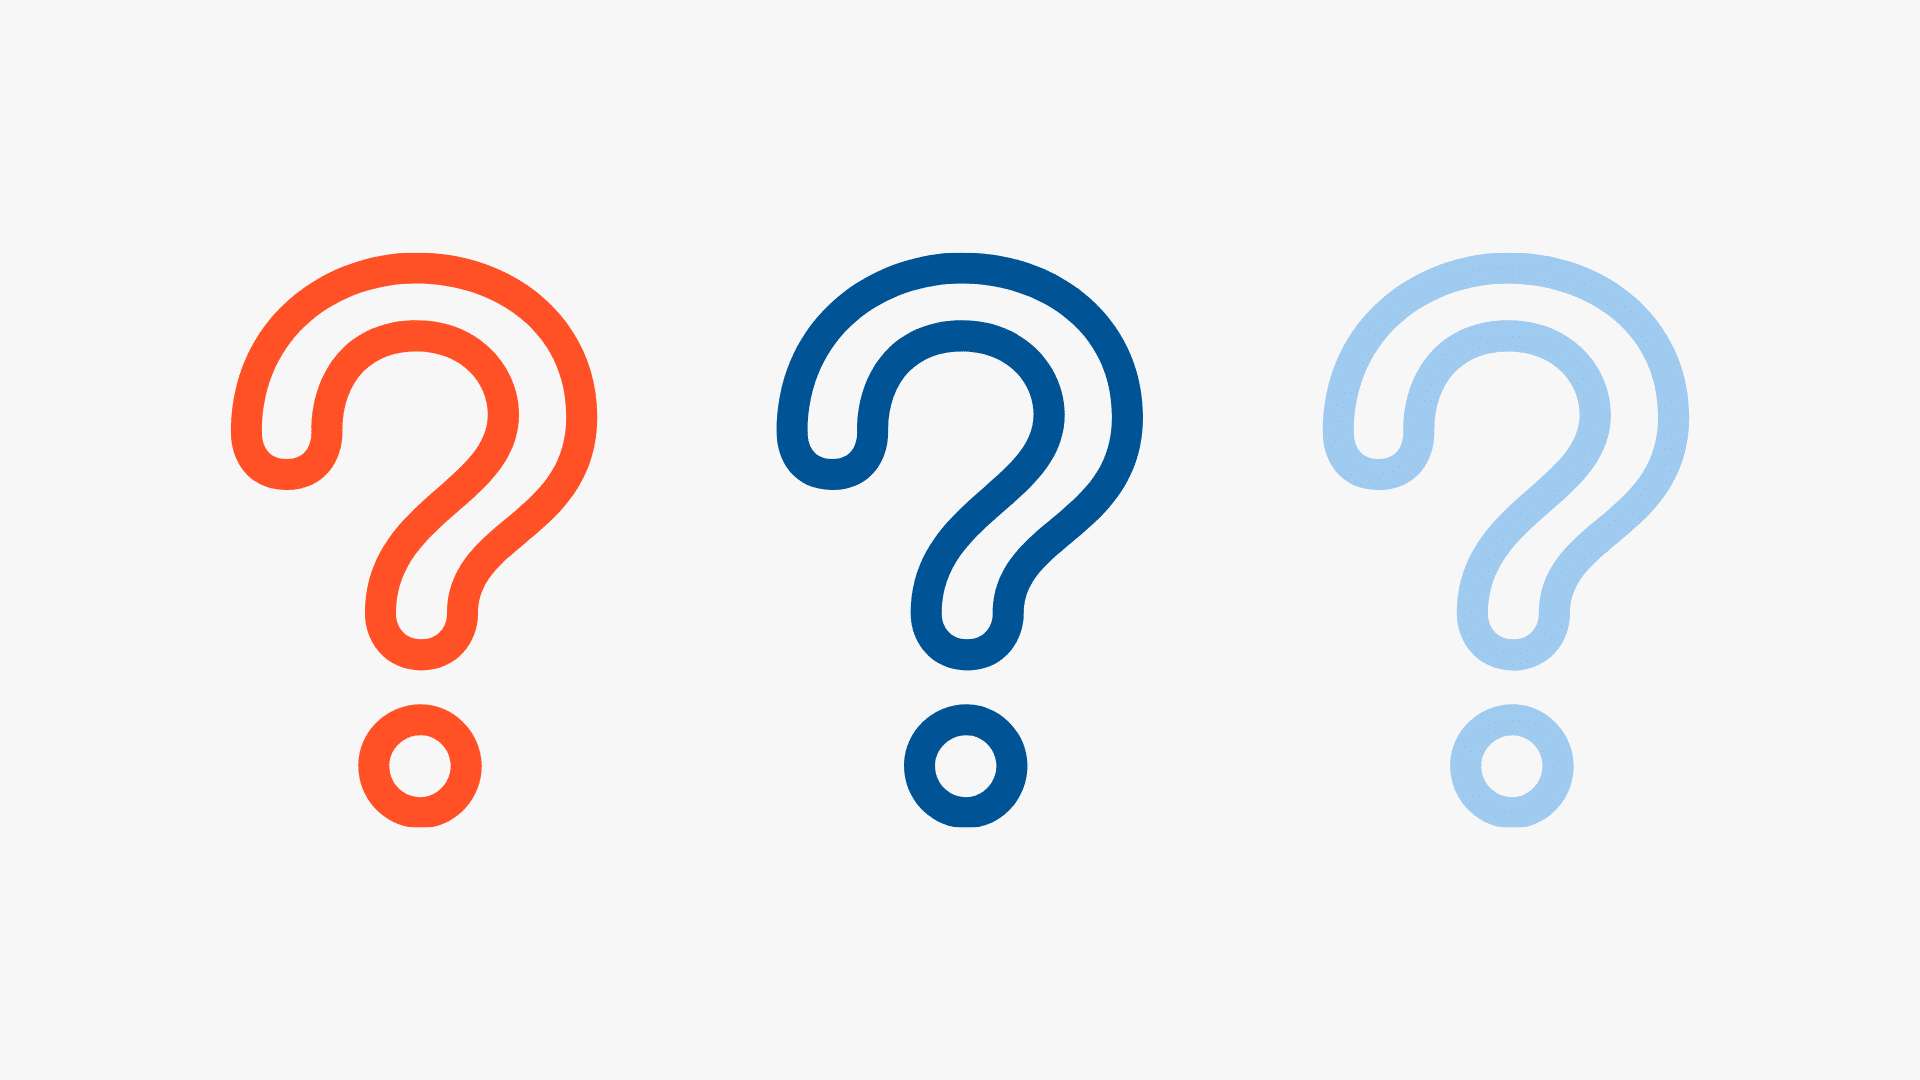 Three question marks in orange, blue and light blue